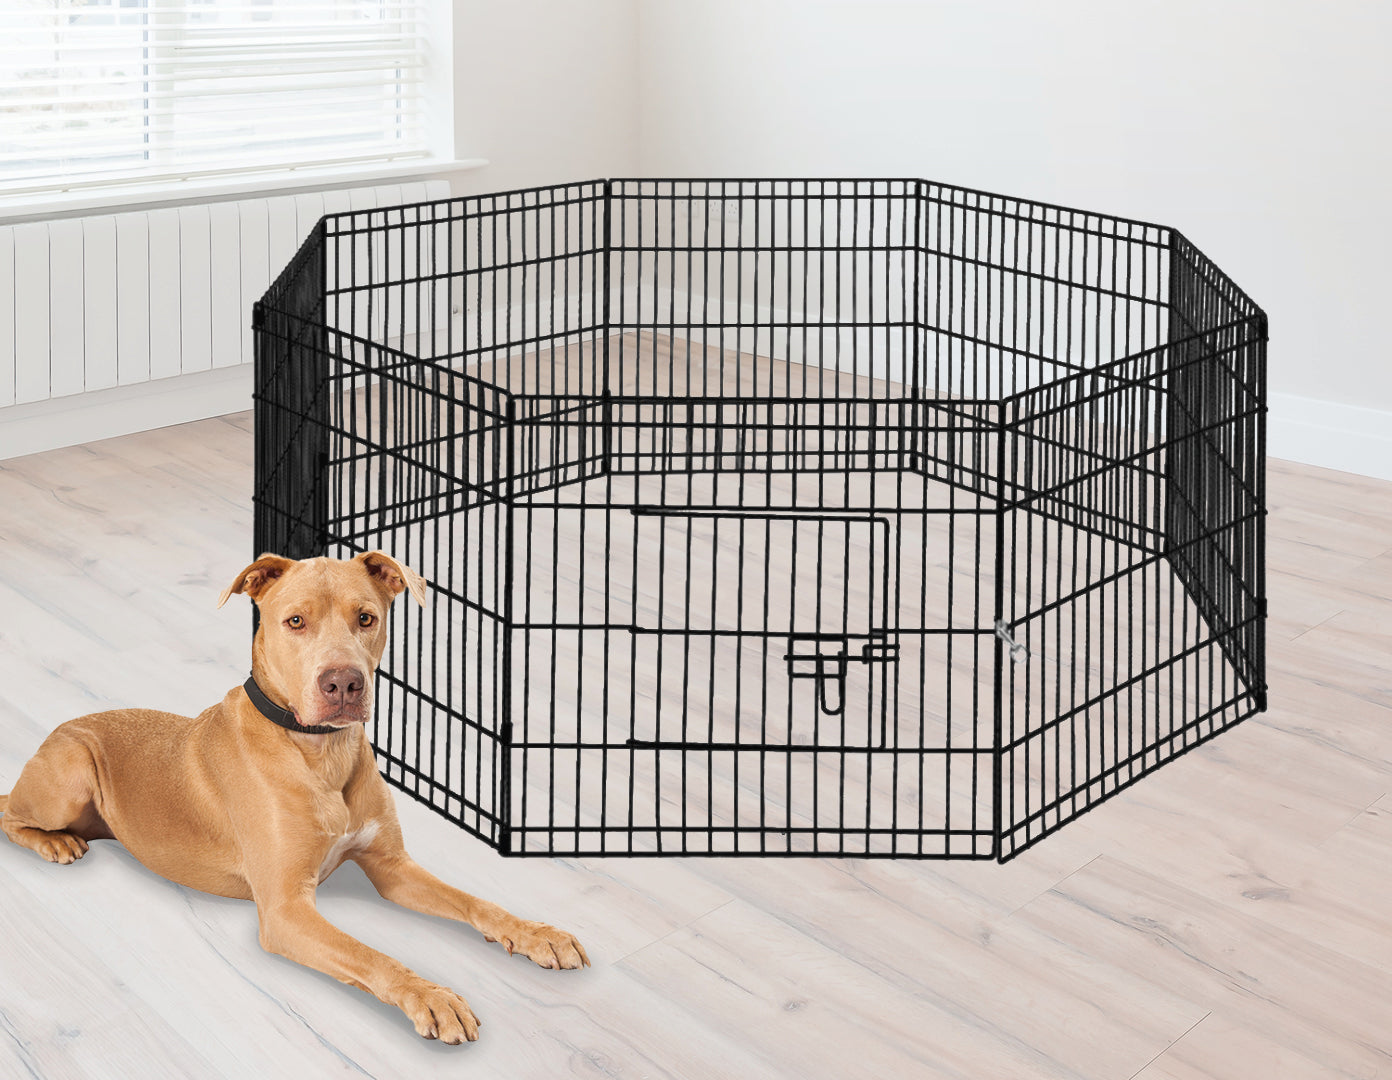 24" 8 Panel Pet Dog Playpen Puppy Exercise Cage Enclosure Fence Play Pen